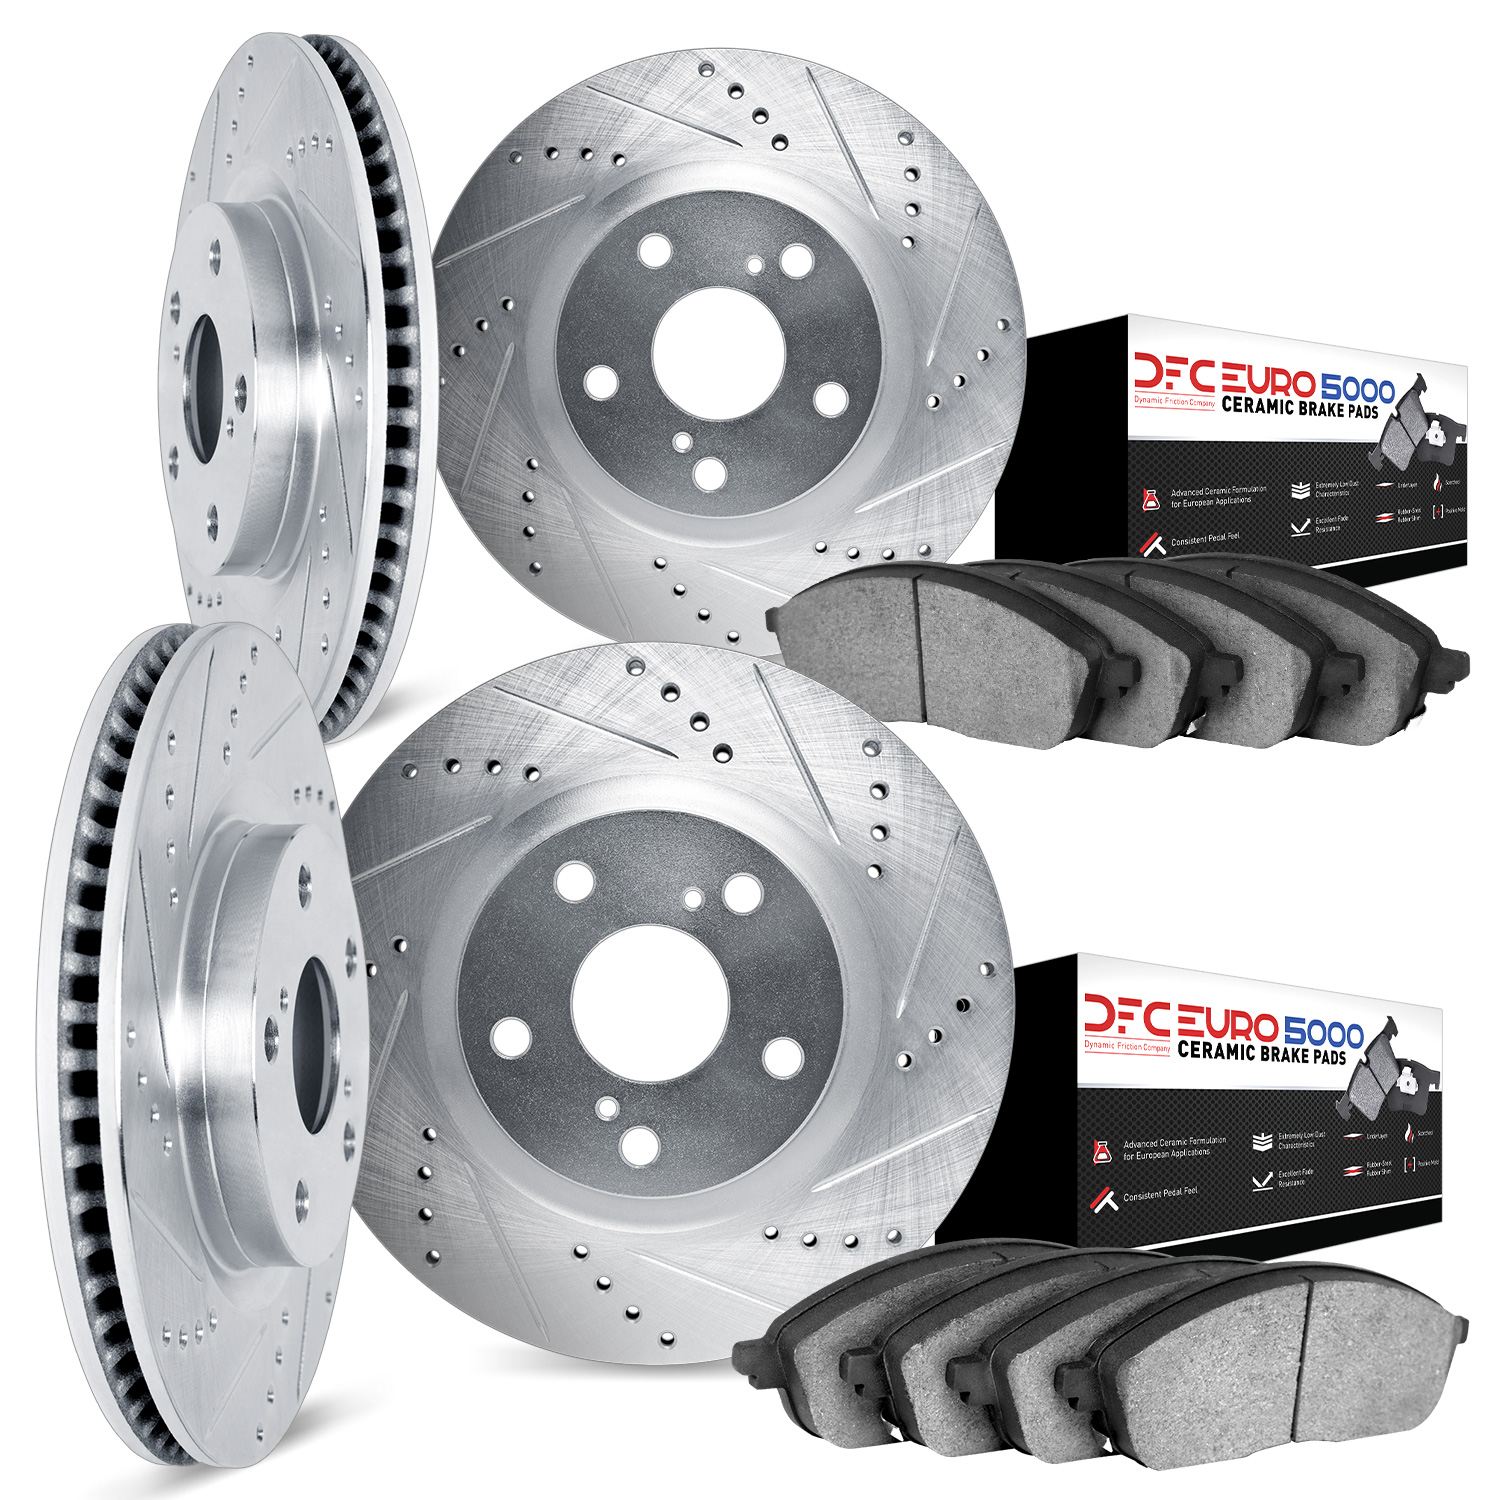 7604-31019 Drilled/Slotted Brake Rotors w/5000 Euro Ceramic Brake Pads Kit [Silver], 2008-2010 BMW, Position: Front and Rear